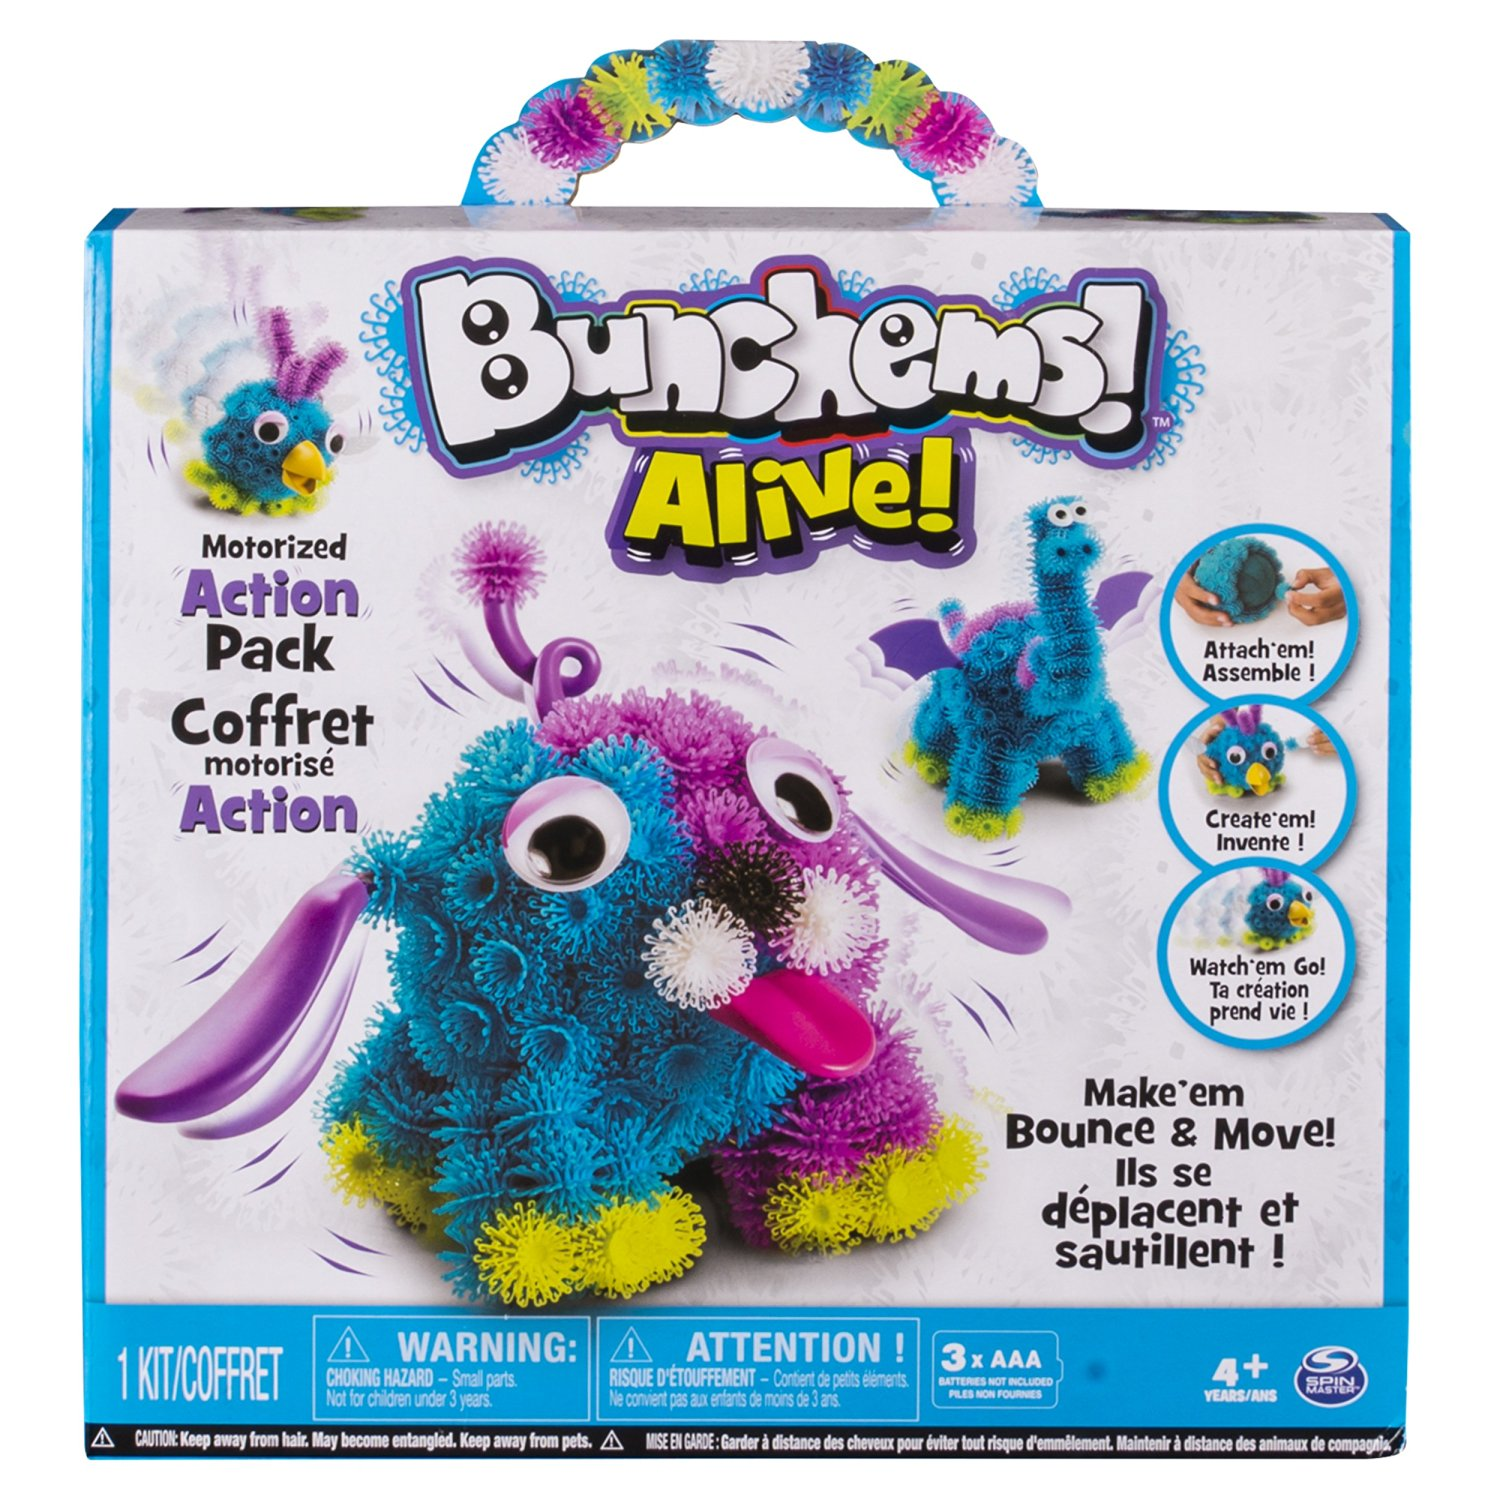 Bunchems Alive Only $9.43 on Amazon!